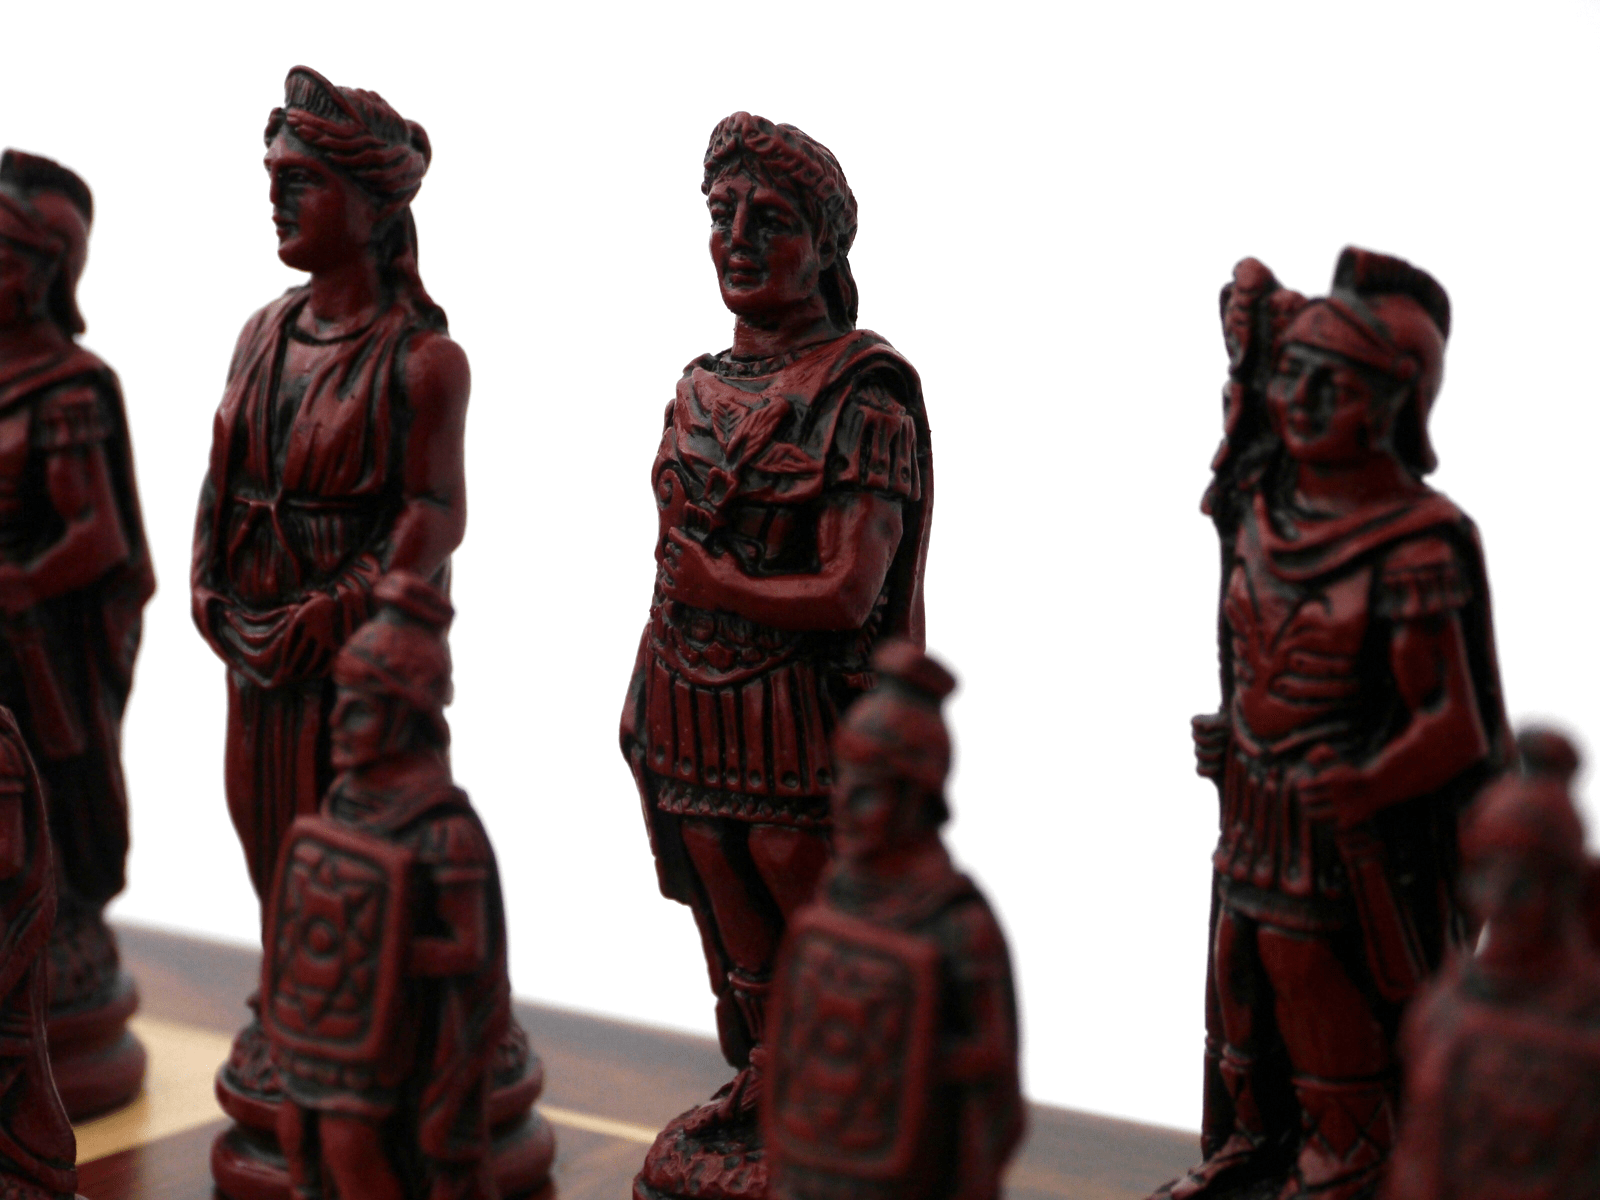 Roman Chess Pieces by Berkeley - Cardinal Red - Piece - Chess-House